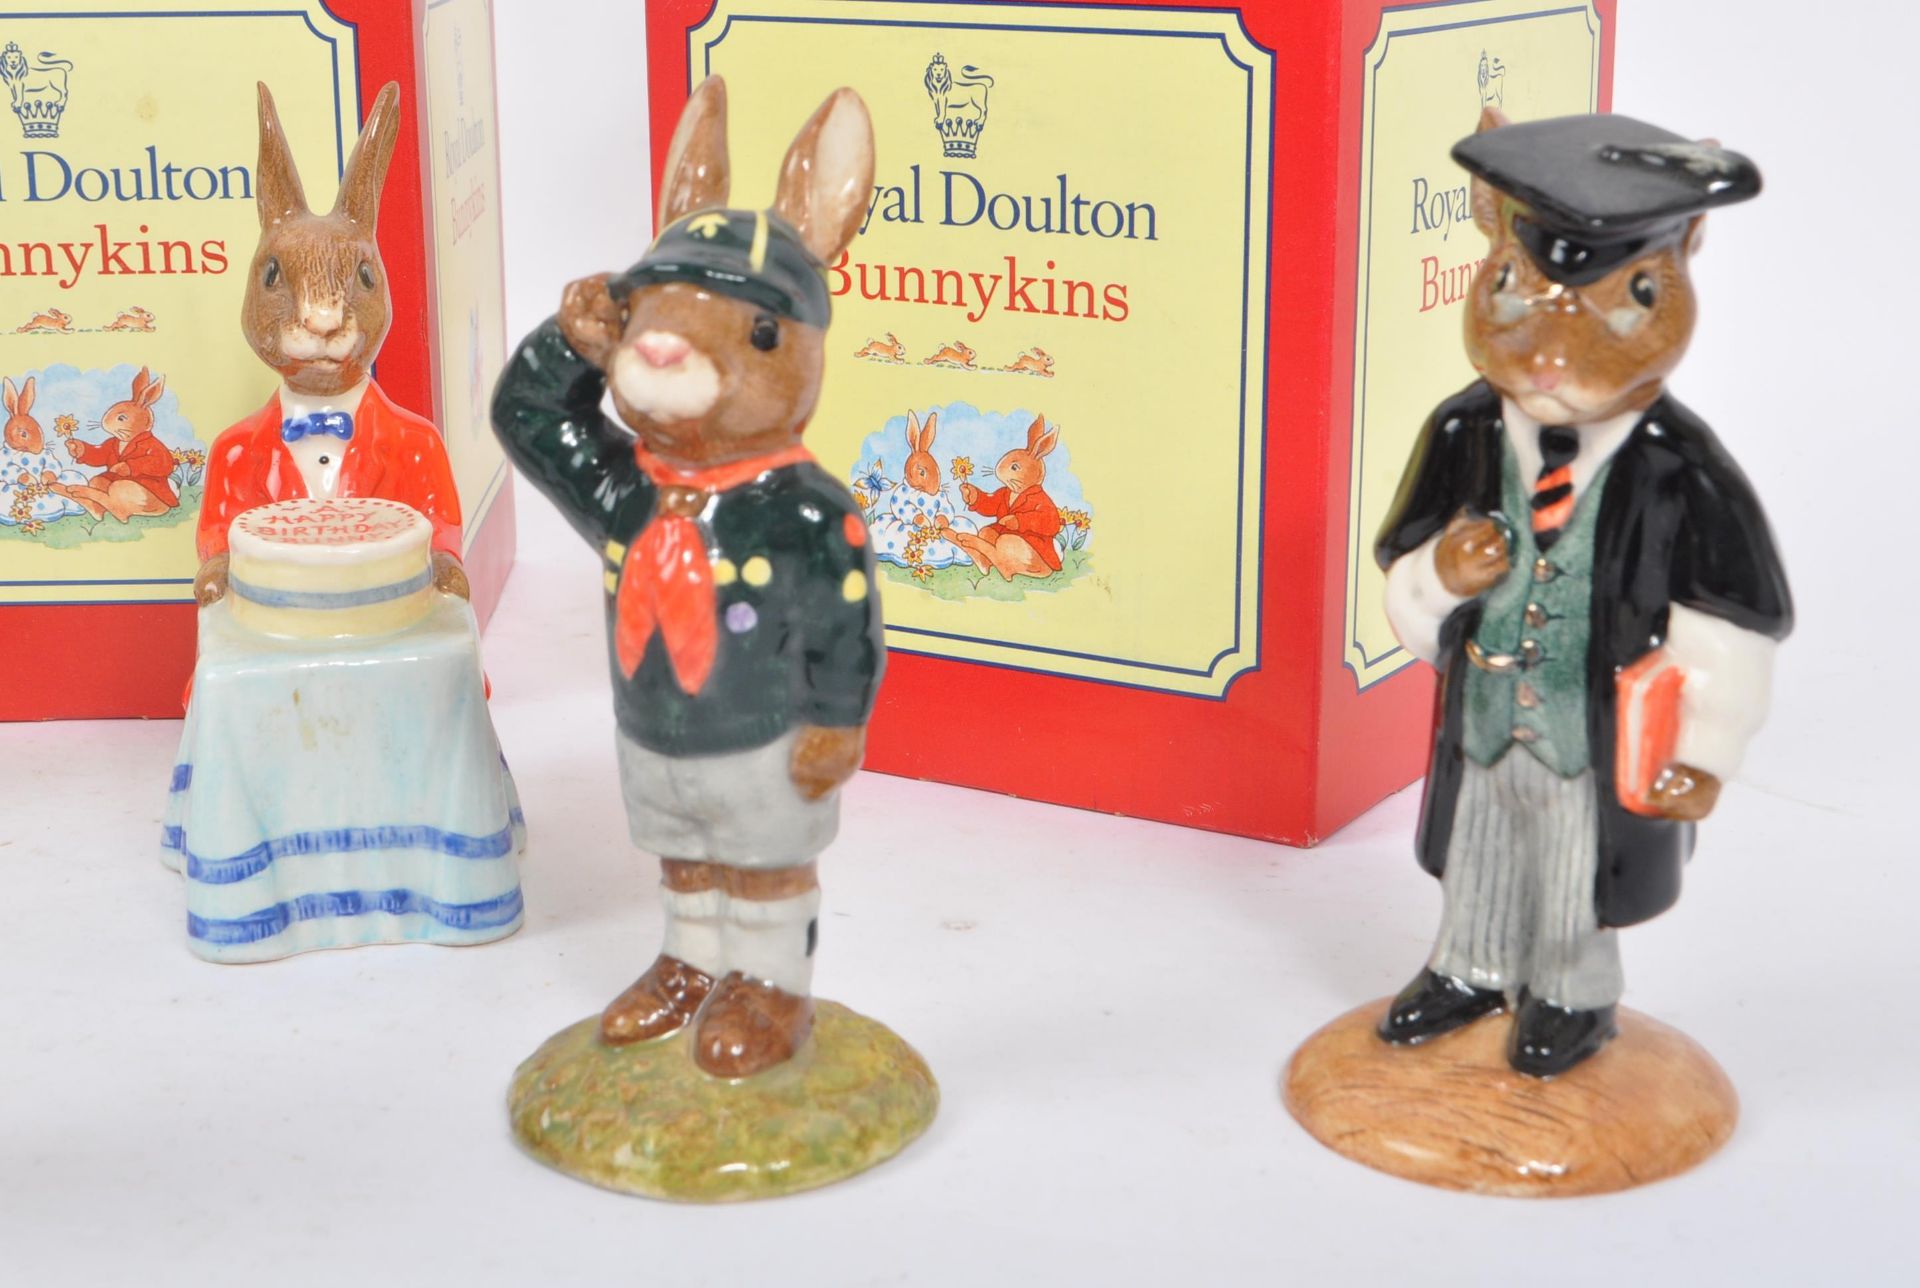 ROYAL DOULTON - BUNNYKINS - COLLECTION OF PORCELAIN FIGURES - Image 6 of 8